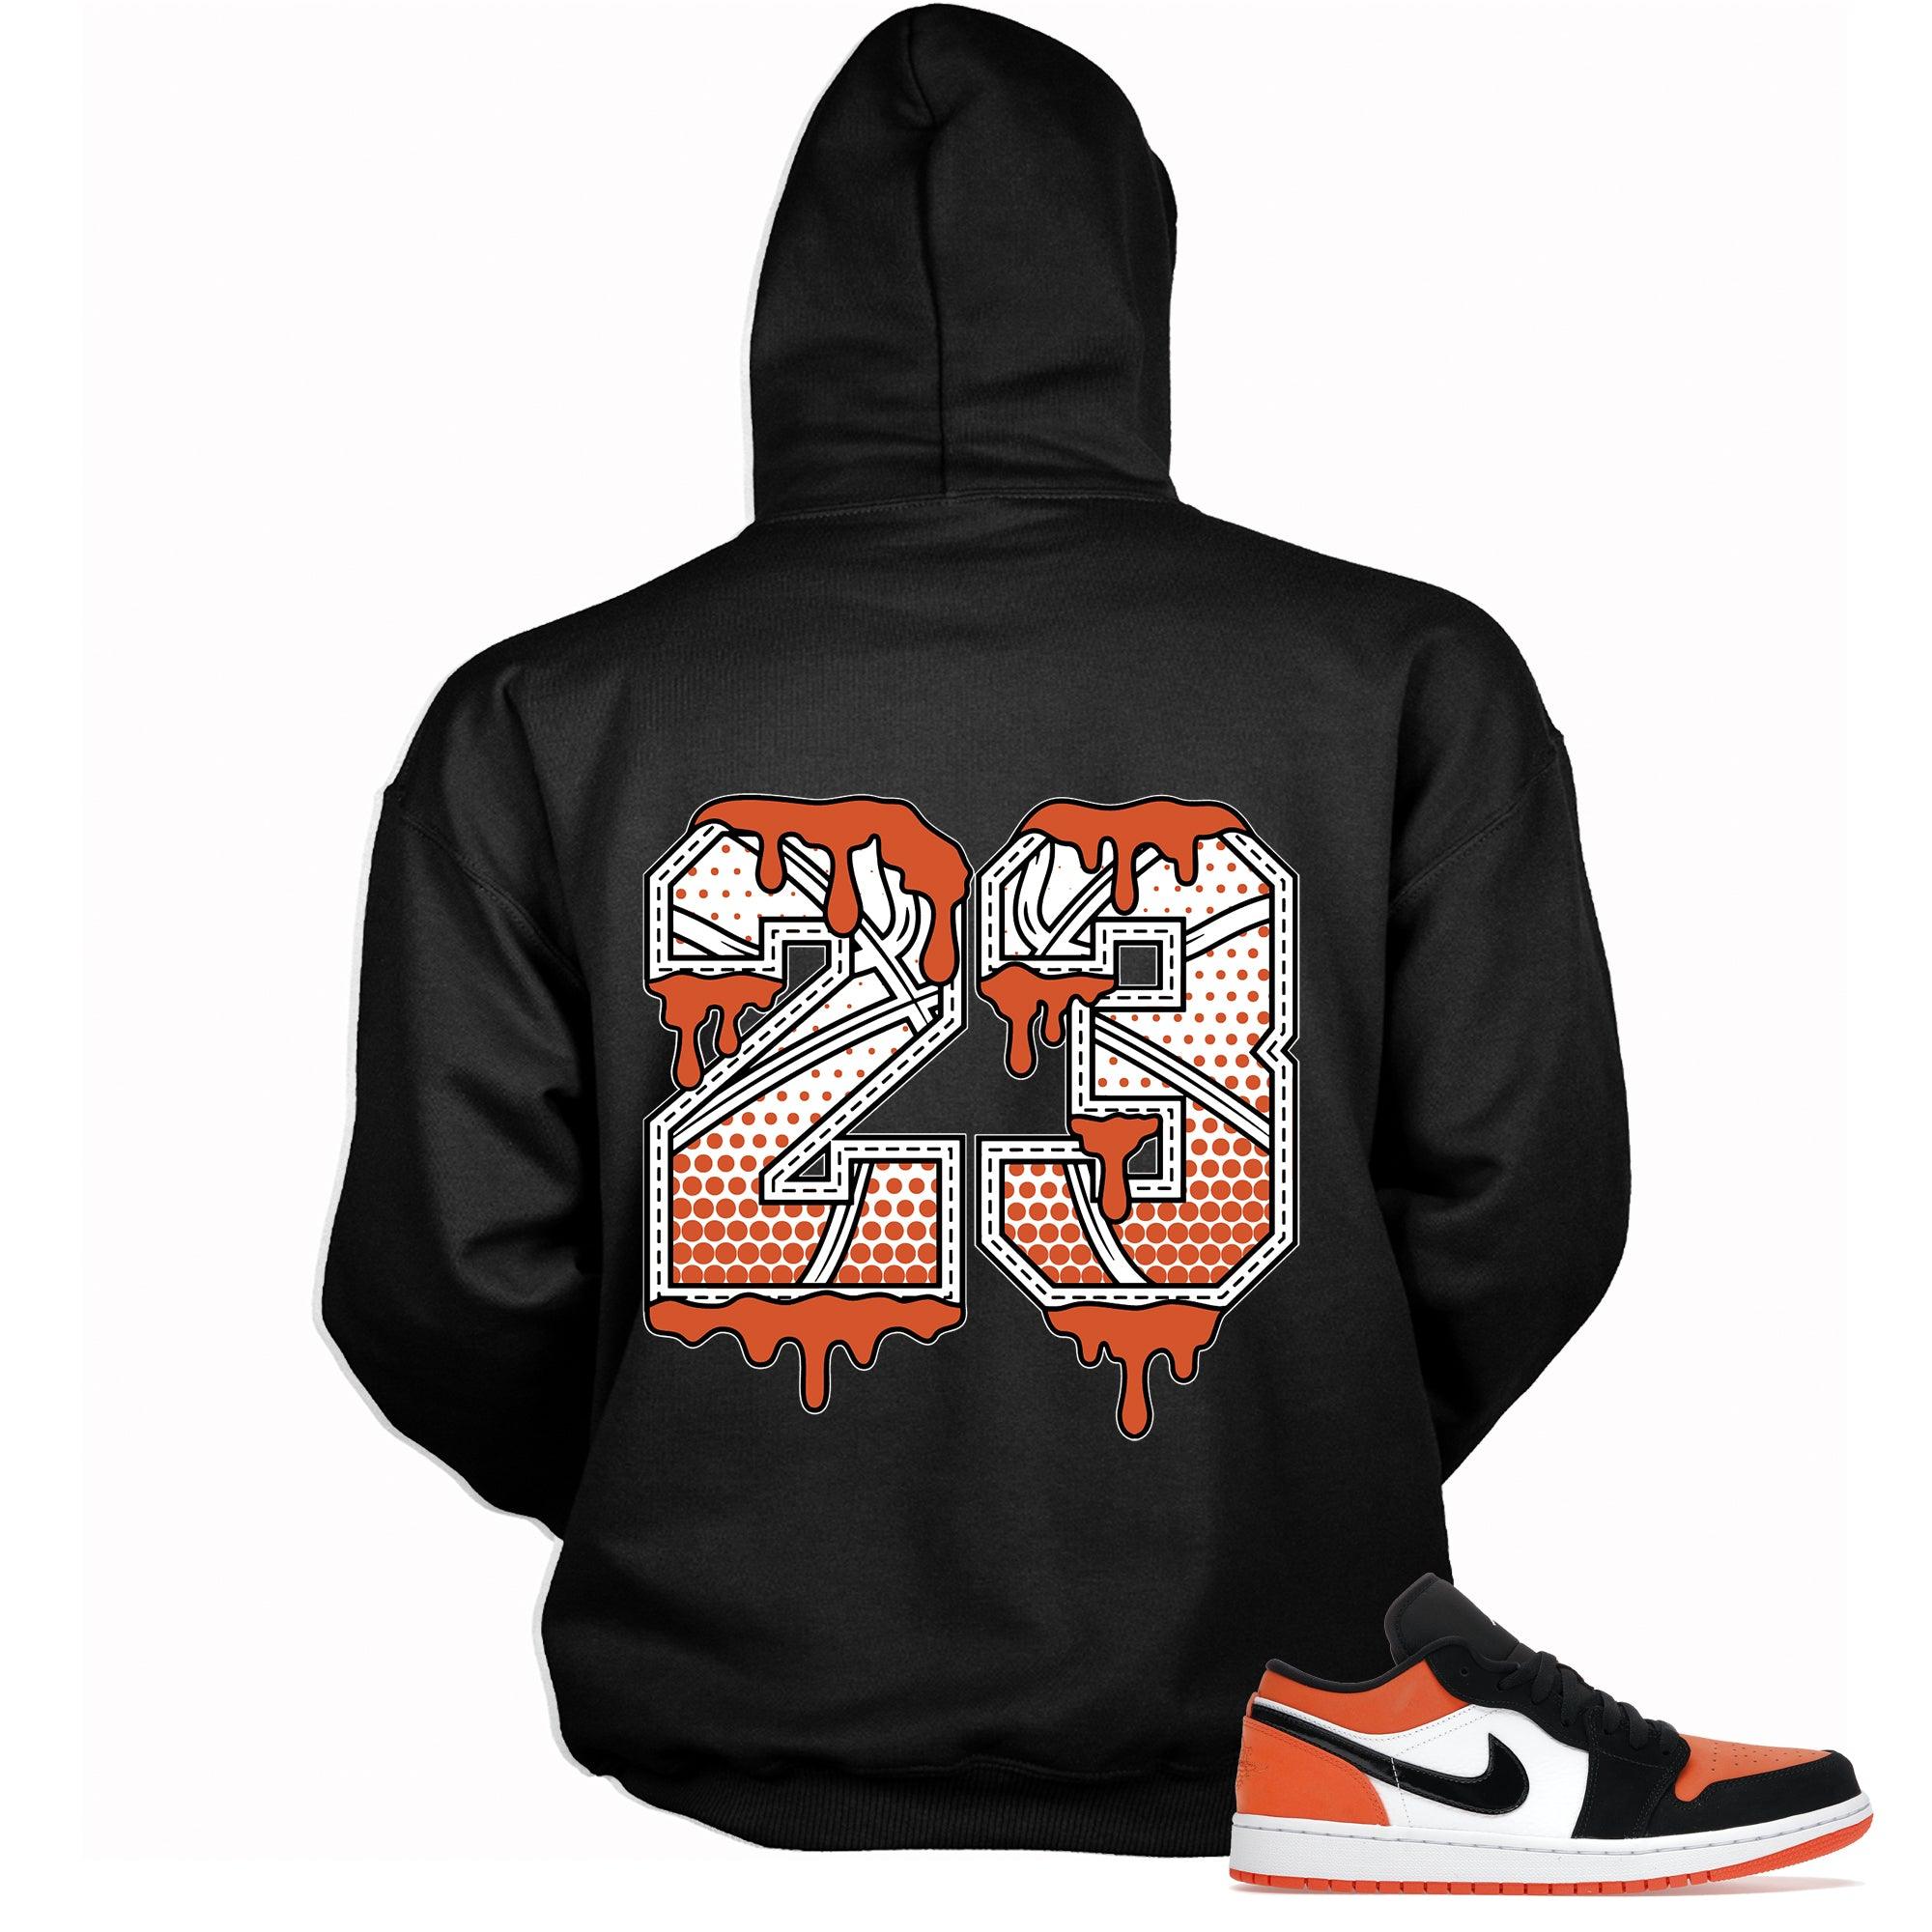 Number 23 Ball Hoodie AJ 1s Retro Low Golf Shattered Backboard photo